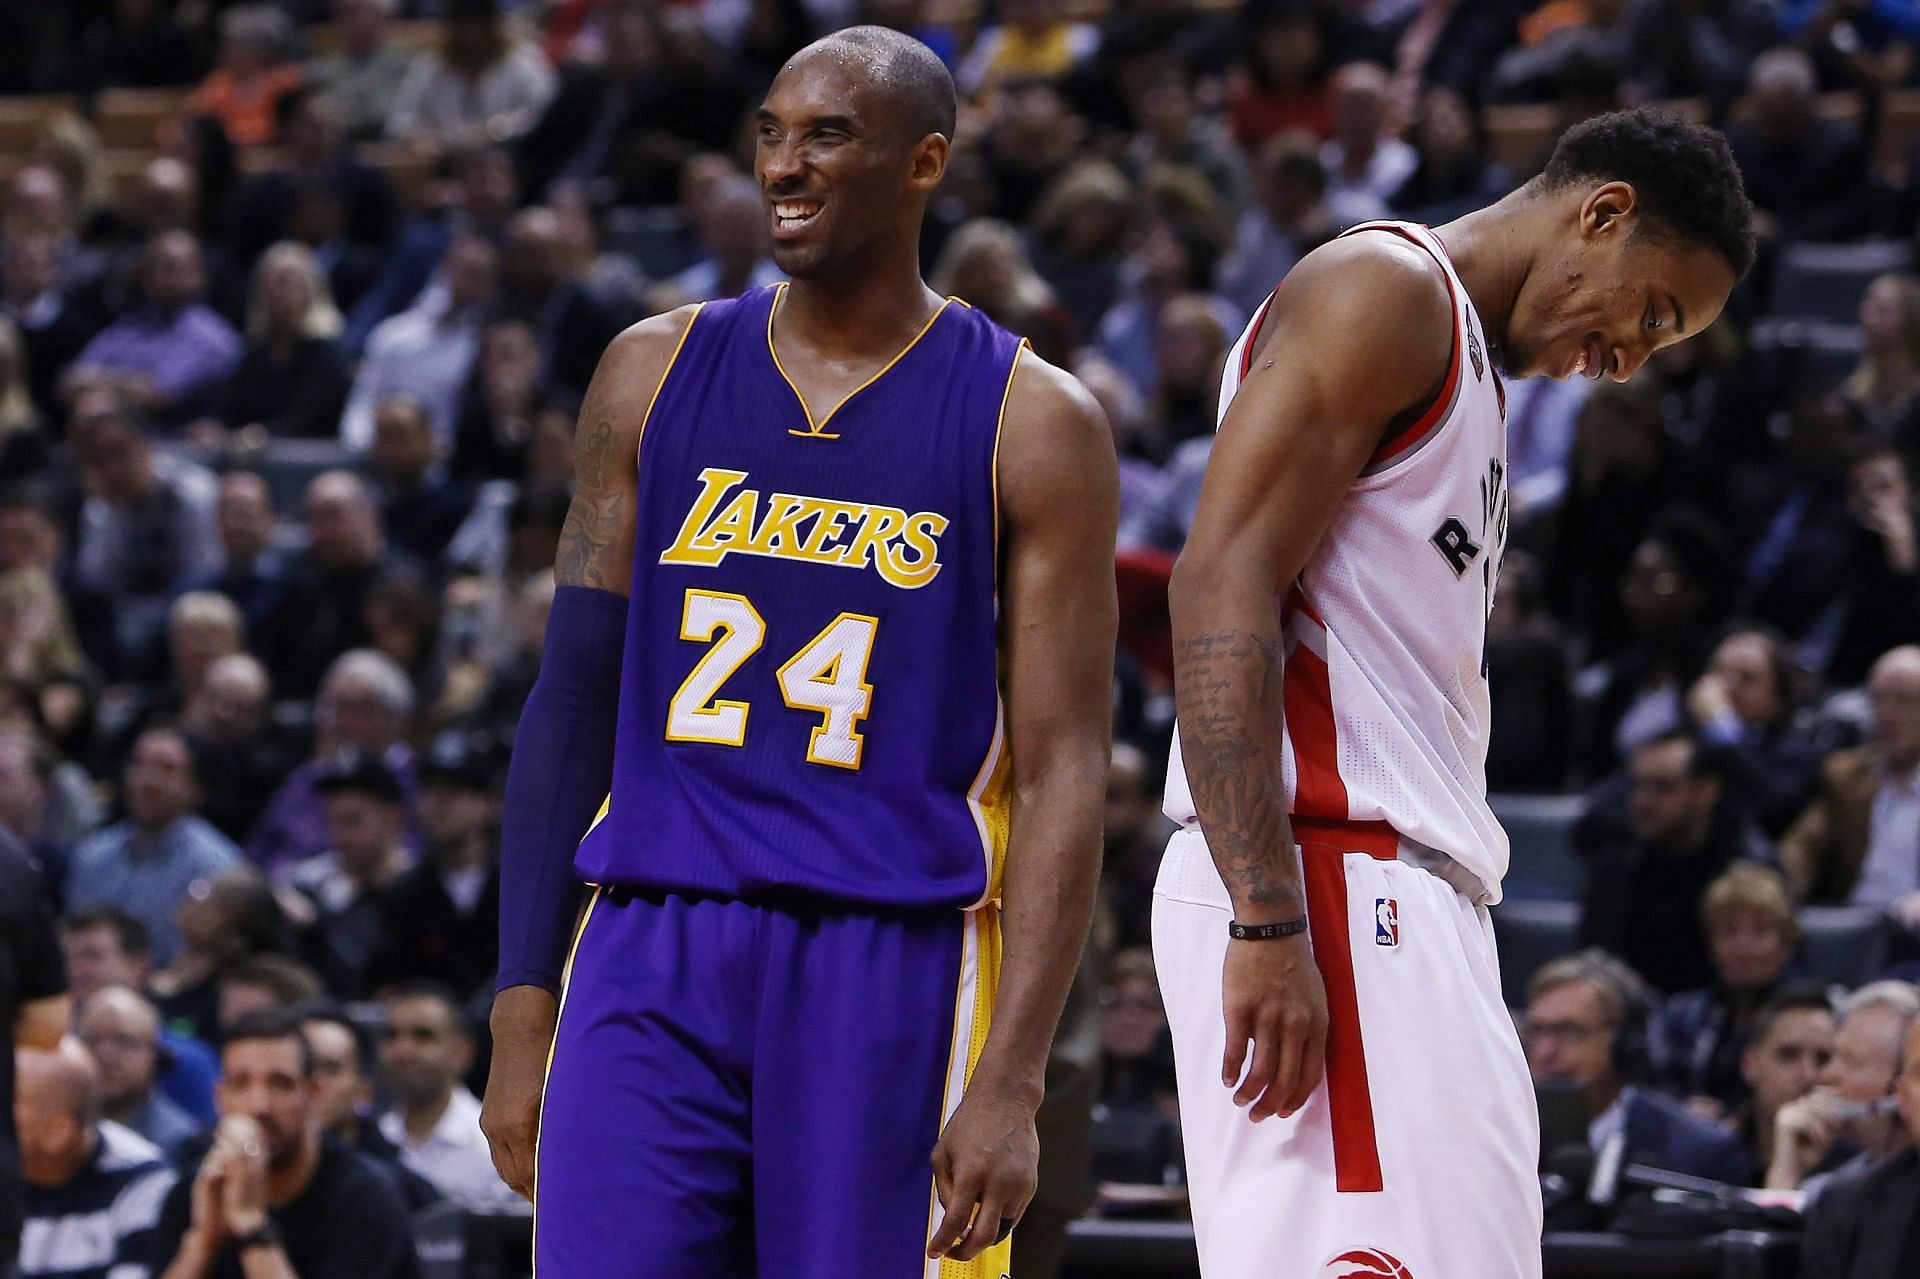 Lakers guard Kobe Bryant and Raptors guard DeMar DeRozan going against one another.